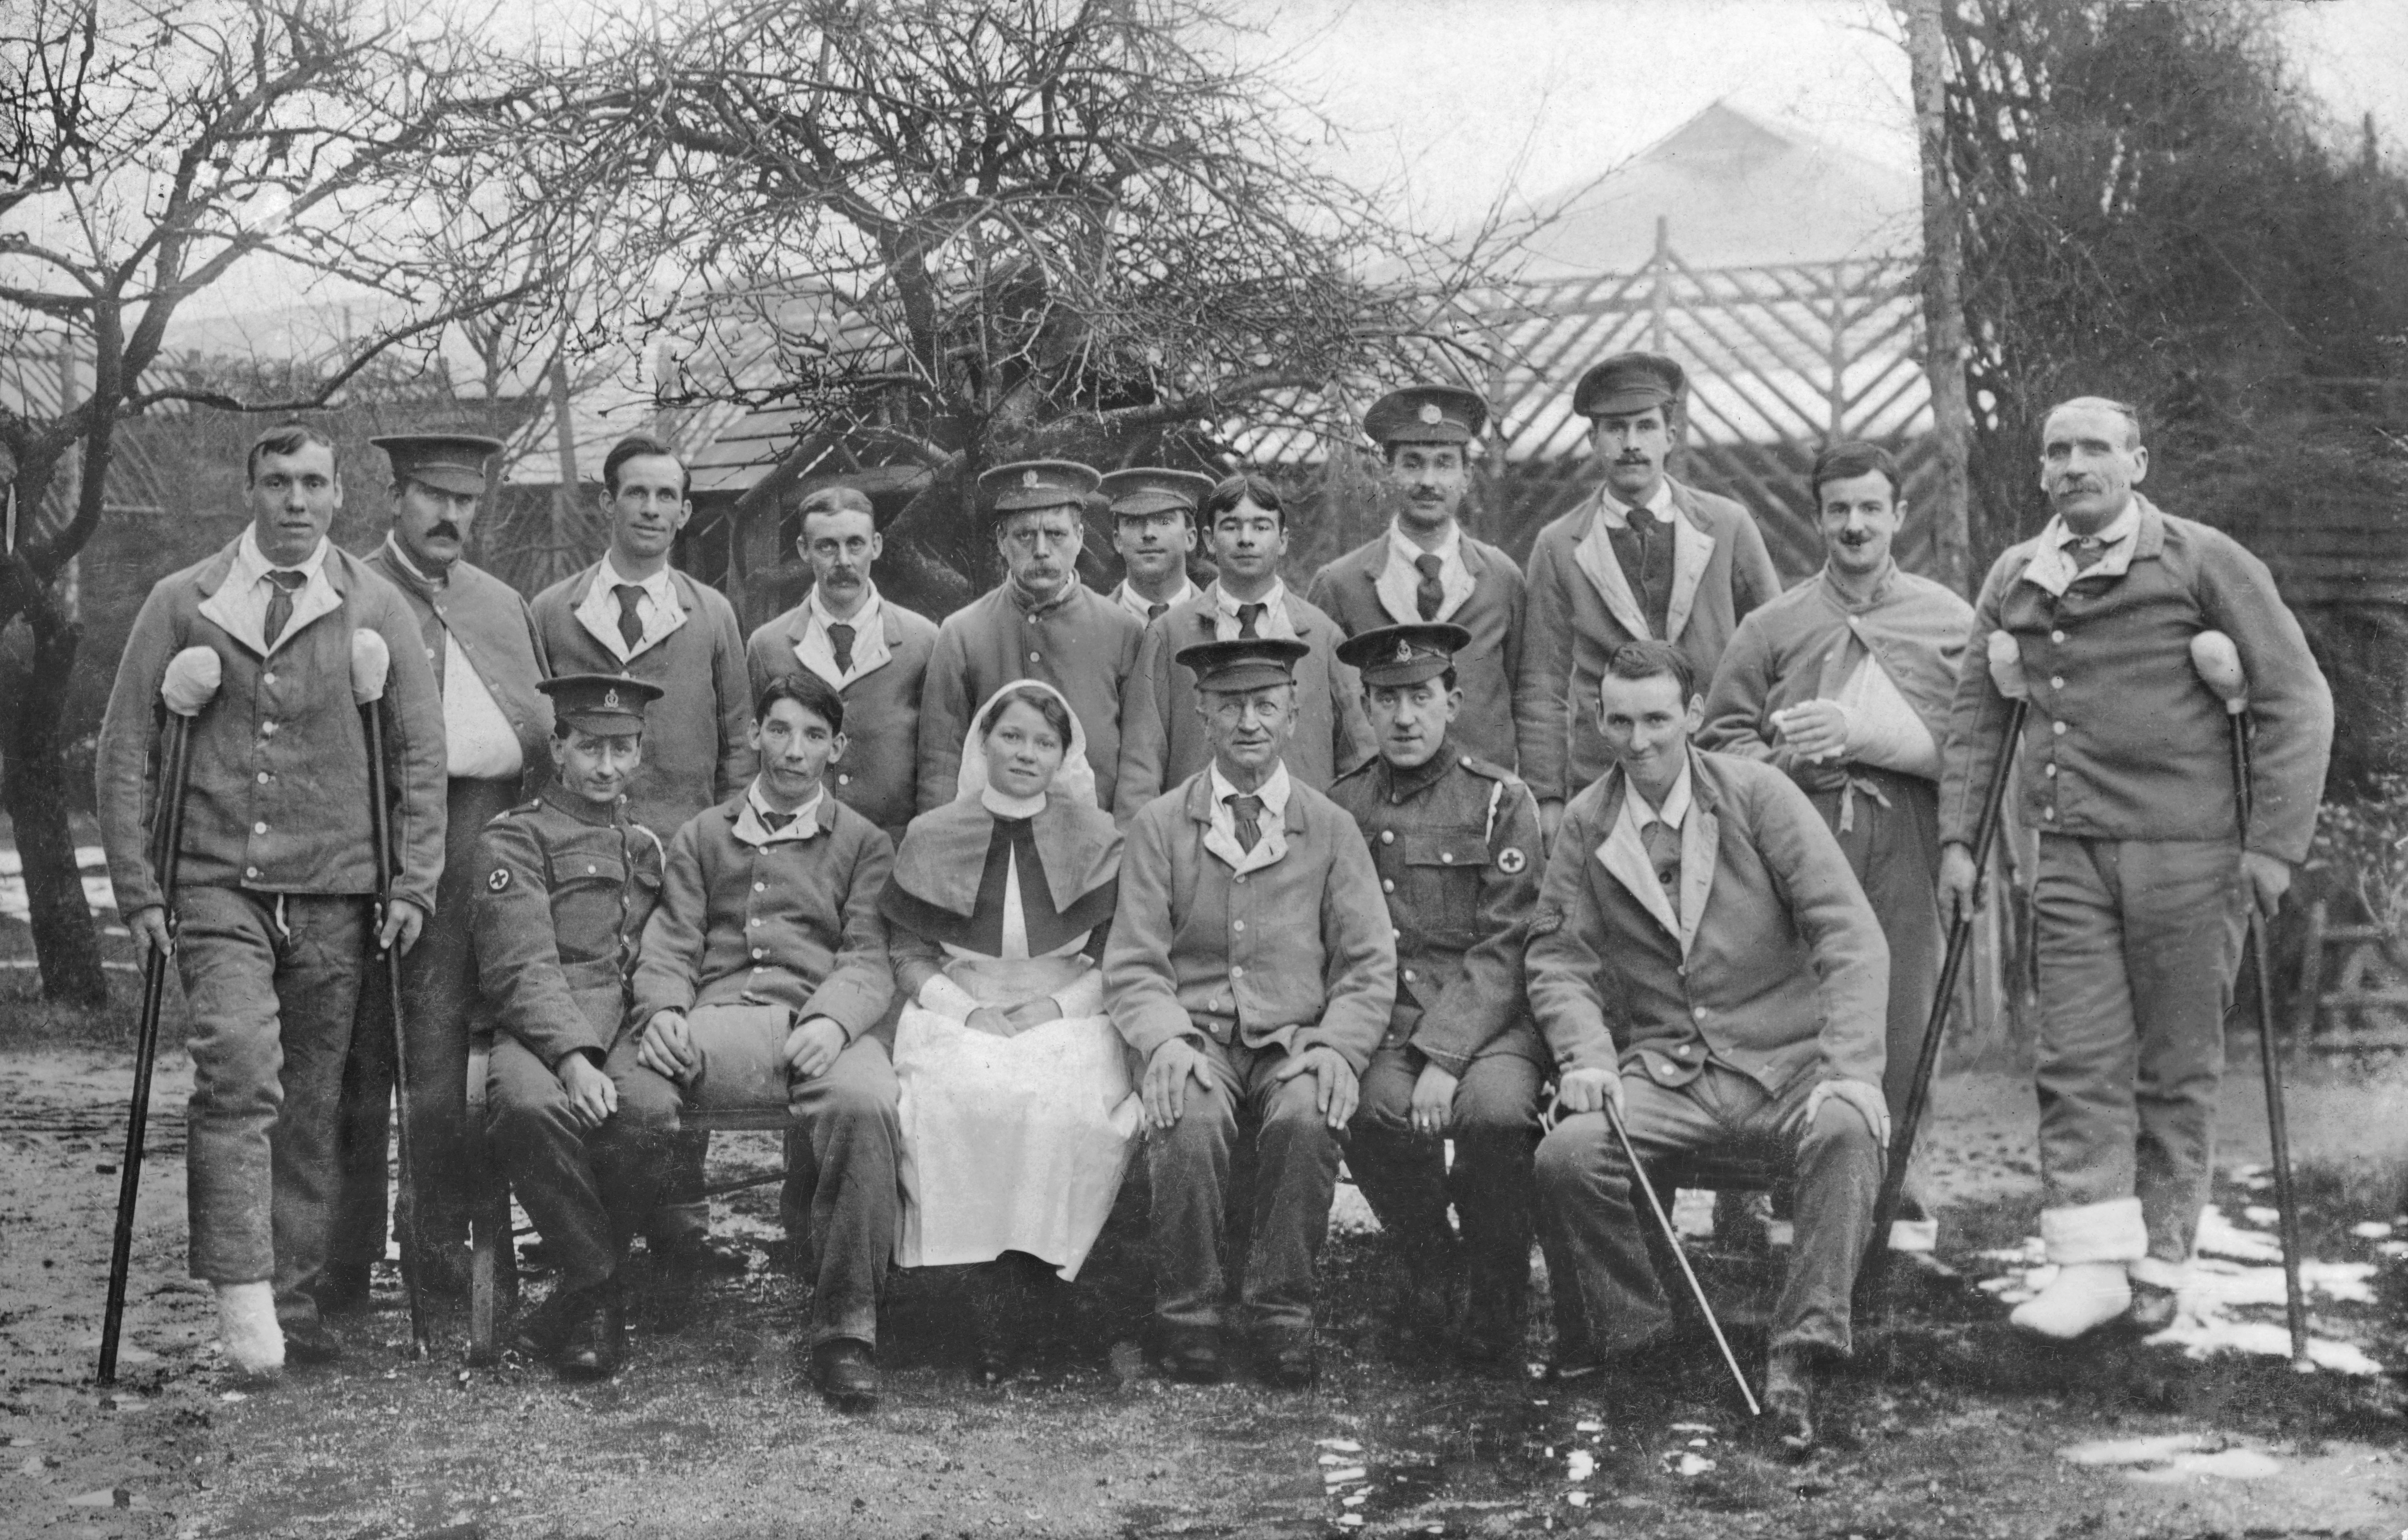 Convalescing troops with medical staff at the Military Hospital in Brockenhurst, Hampshire 1917.